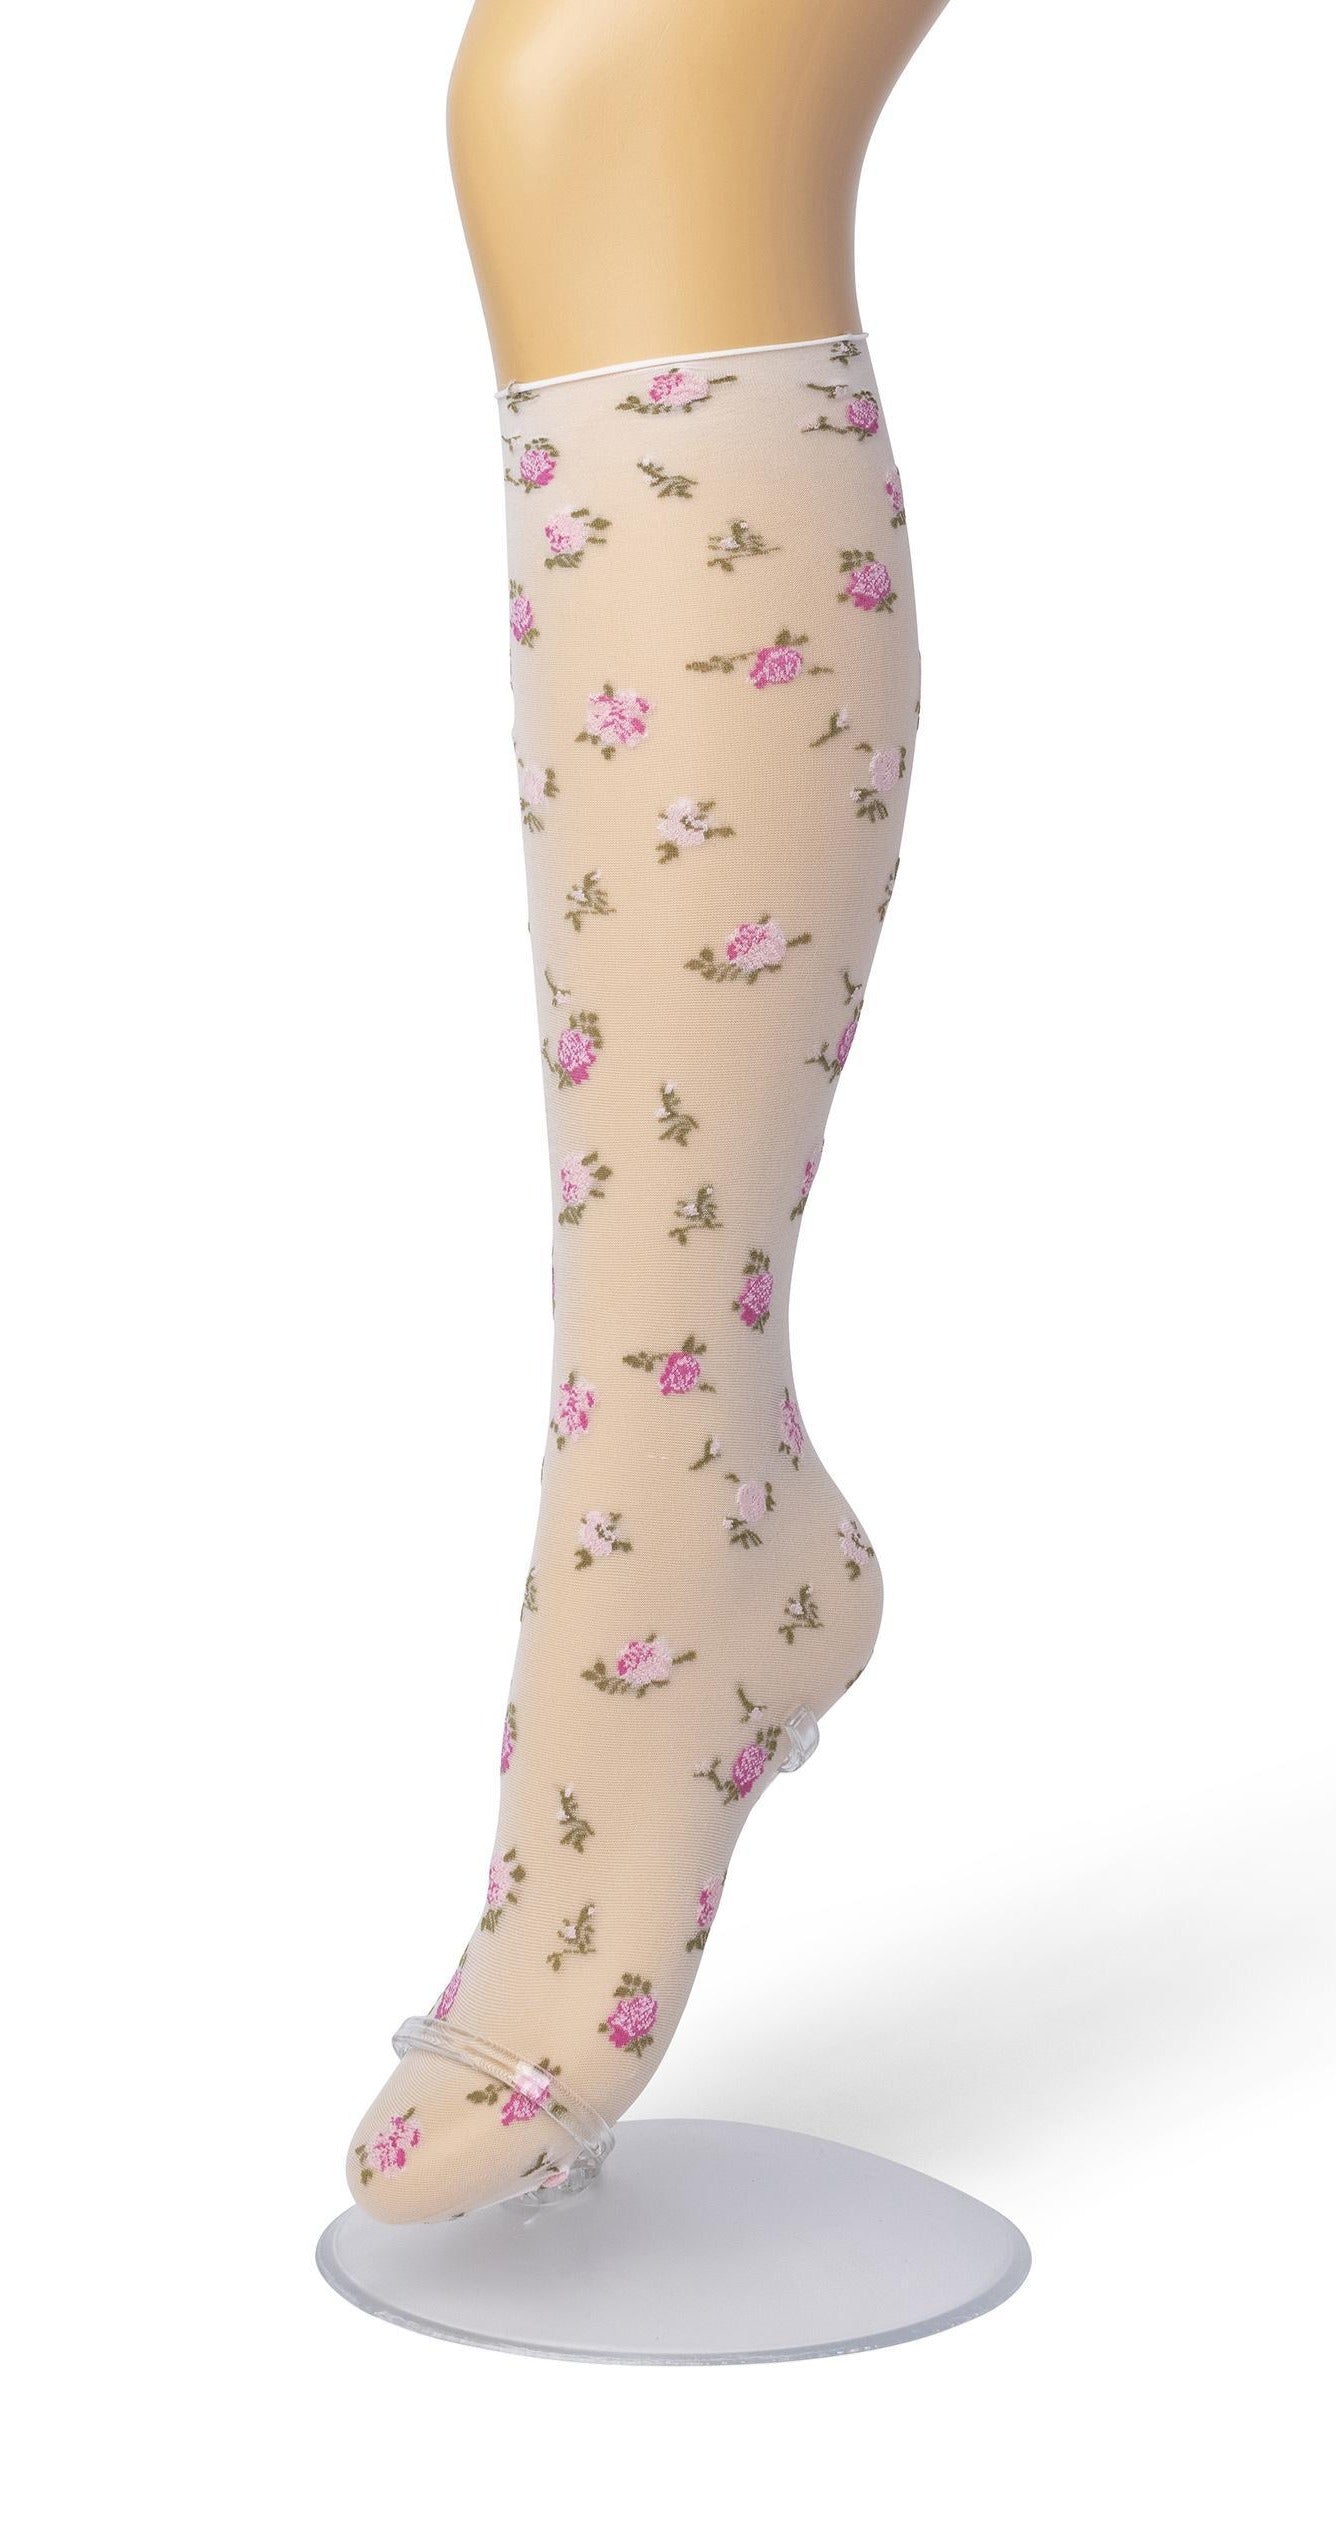 Bonnie Doon English Flower - Sheer white fashion knee-high socks with a woven floral pattern and no cuff roll comfort edge.